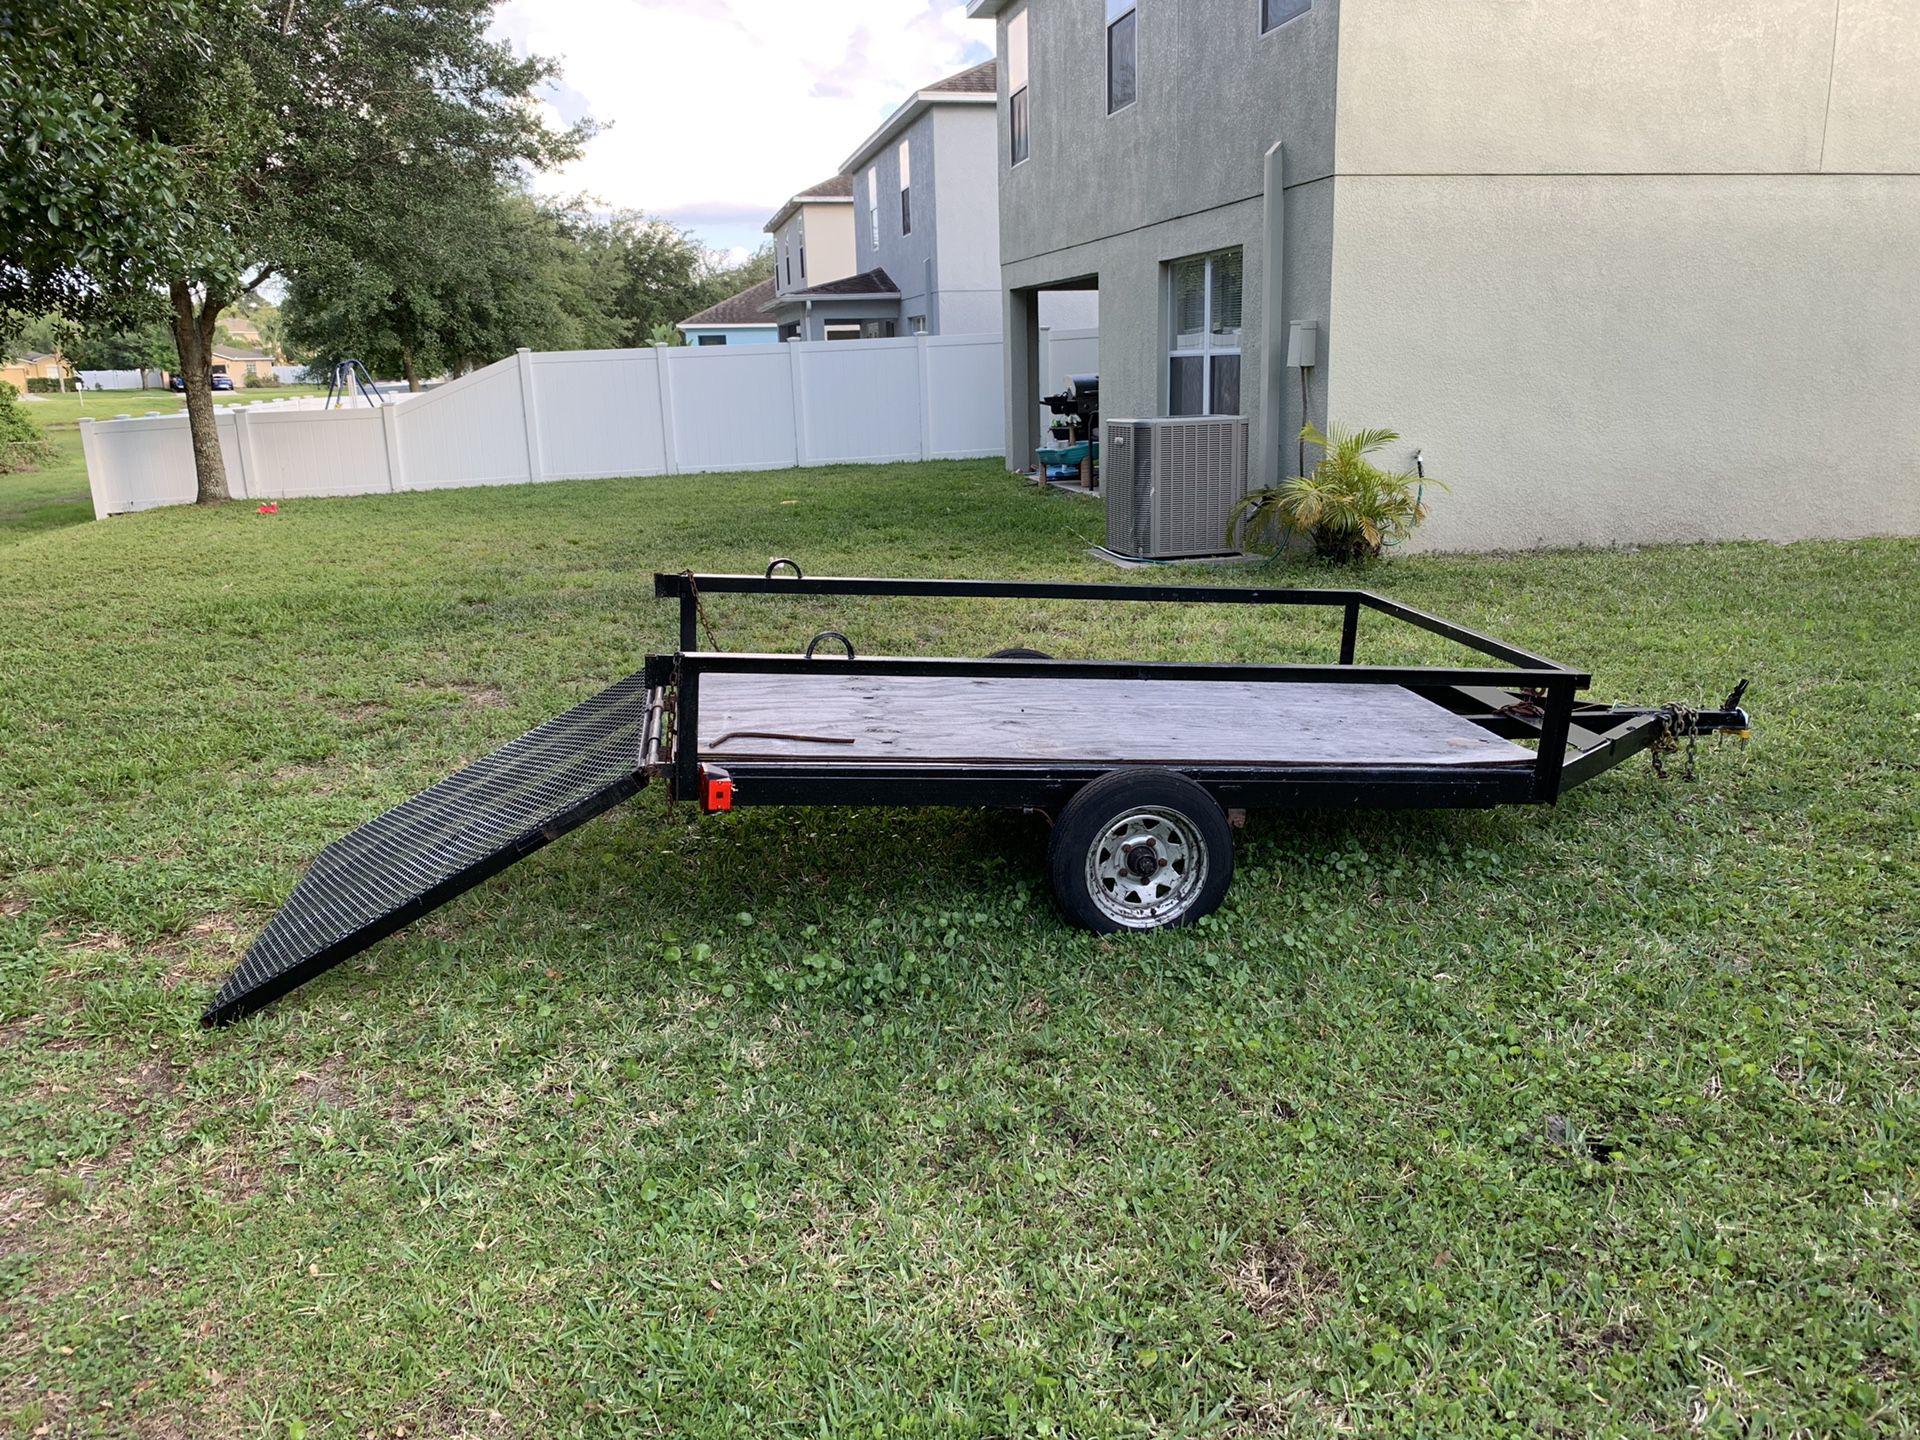 4x6 utility trailer, has newer wiring kits and new lights. Has a spare tire holder.